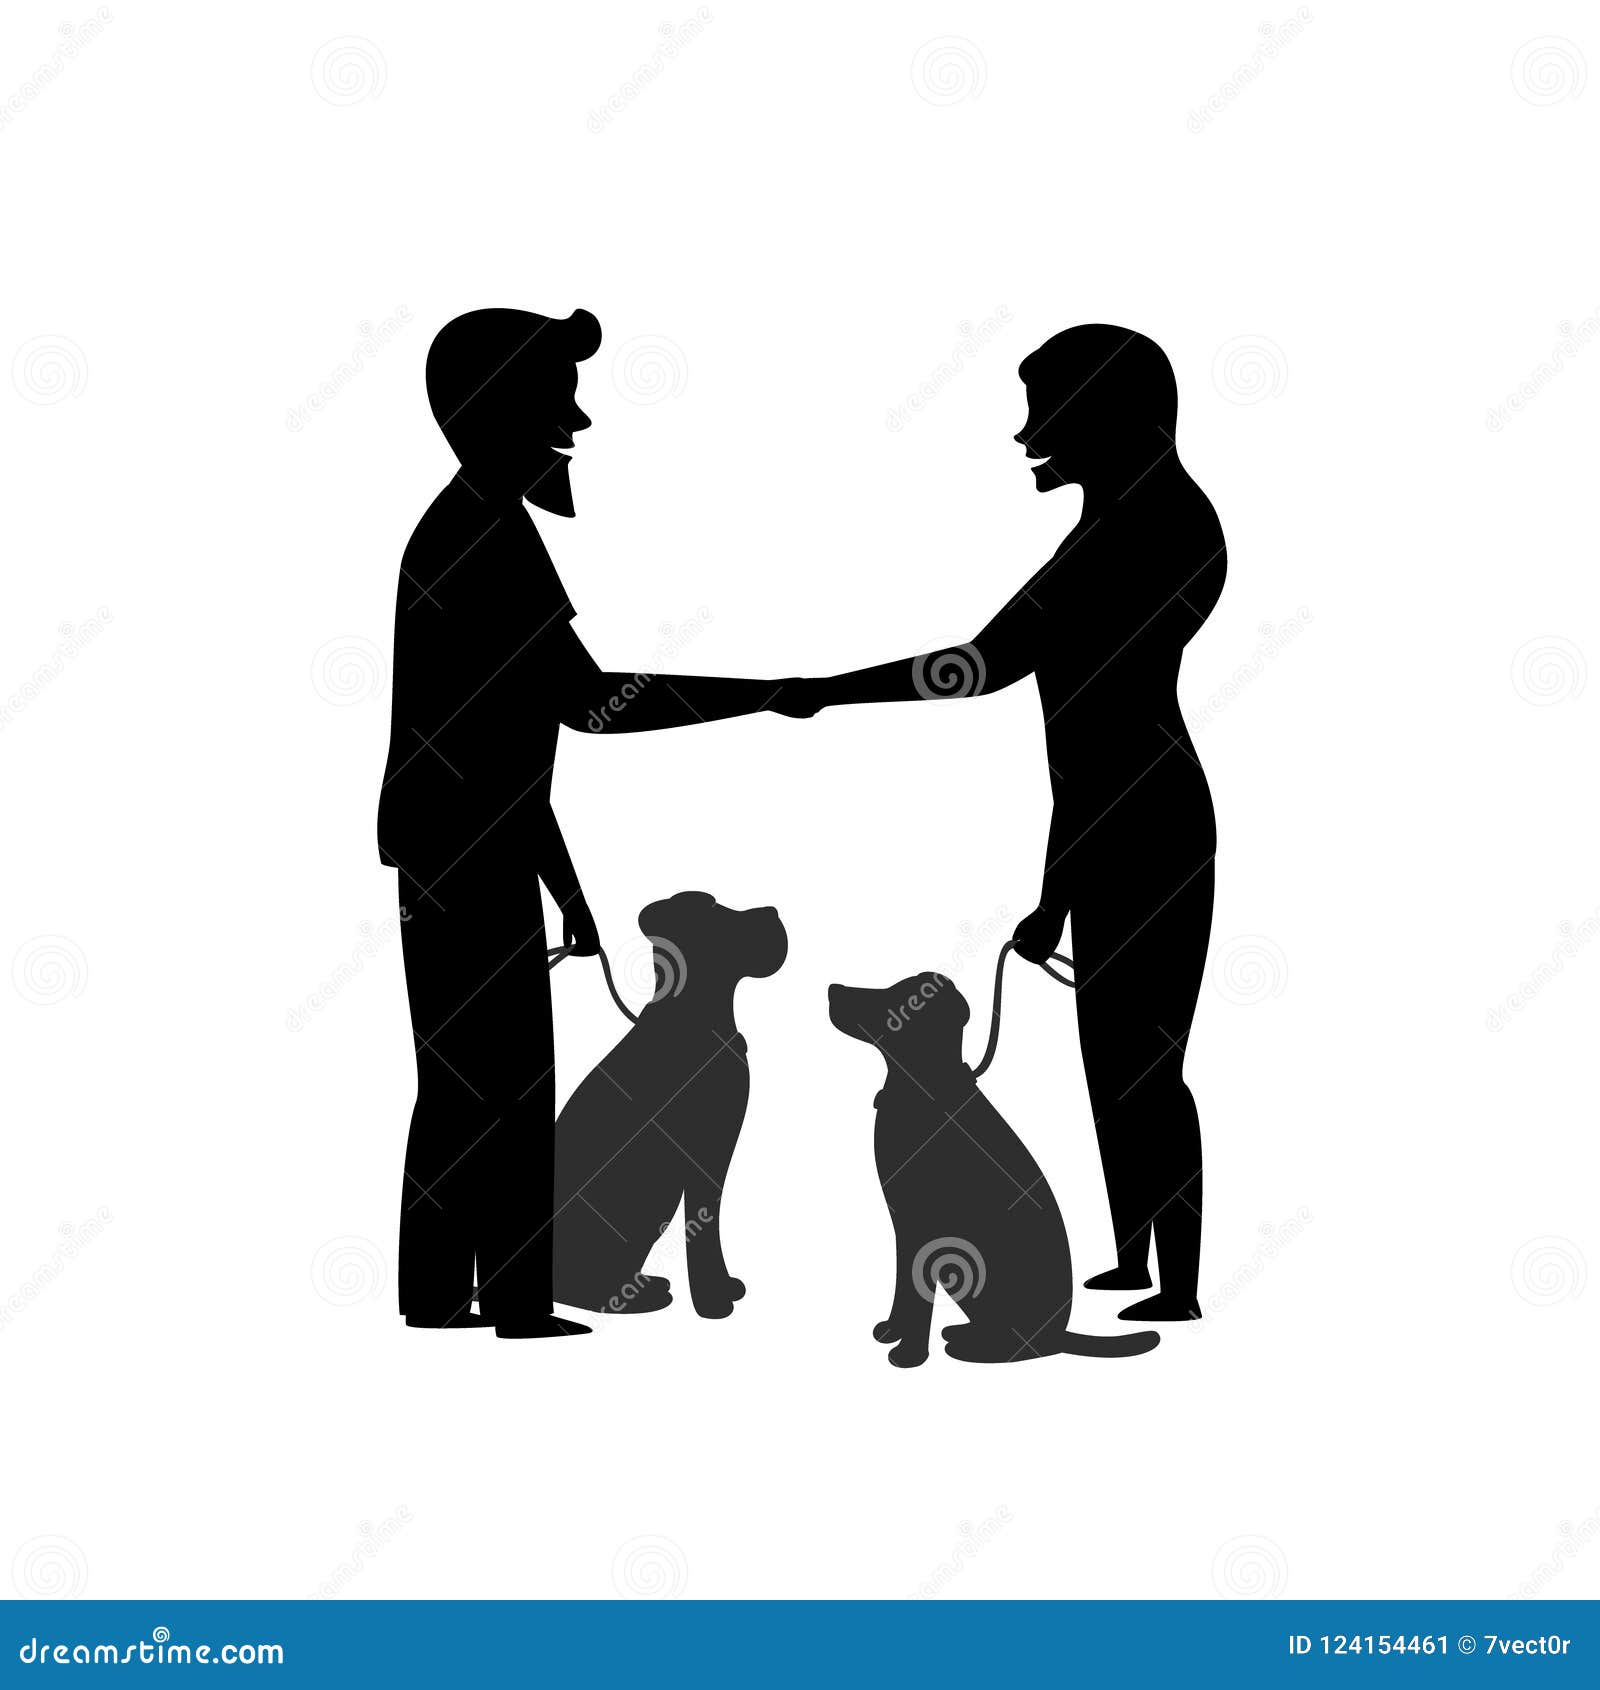 silhouette of two dog owners training their pets to sit close behave when meeting greeting each other